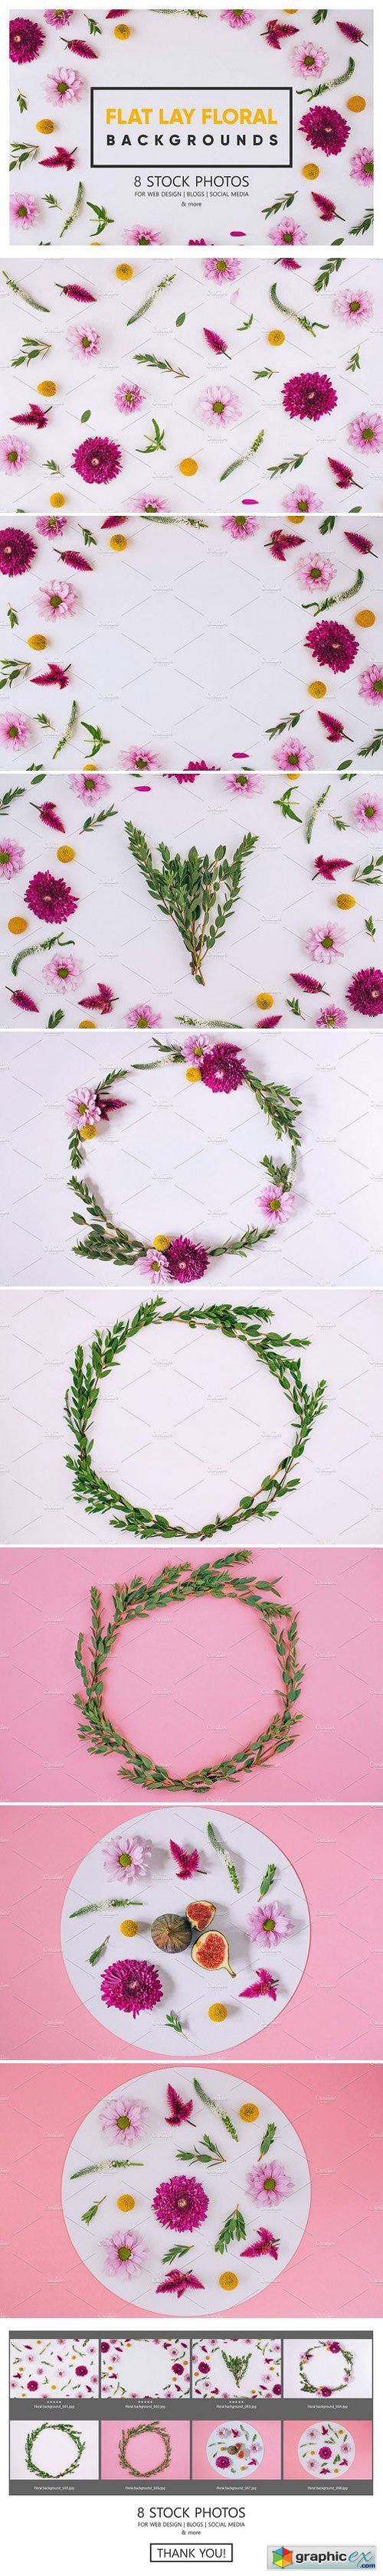 Flat lay floral Stock Photo